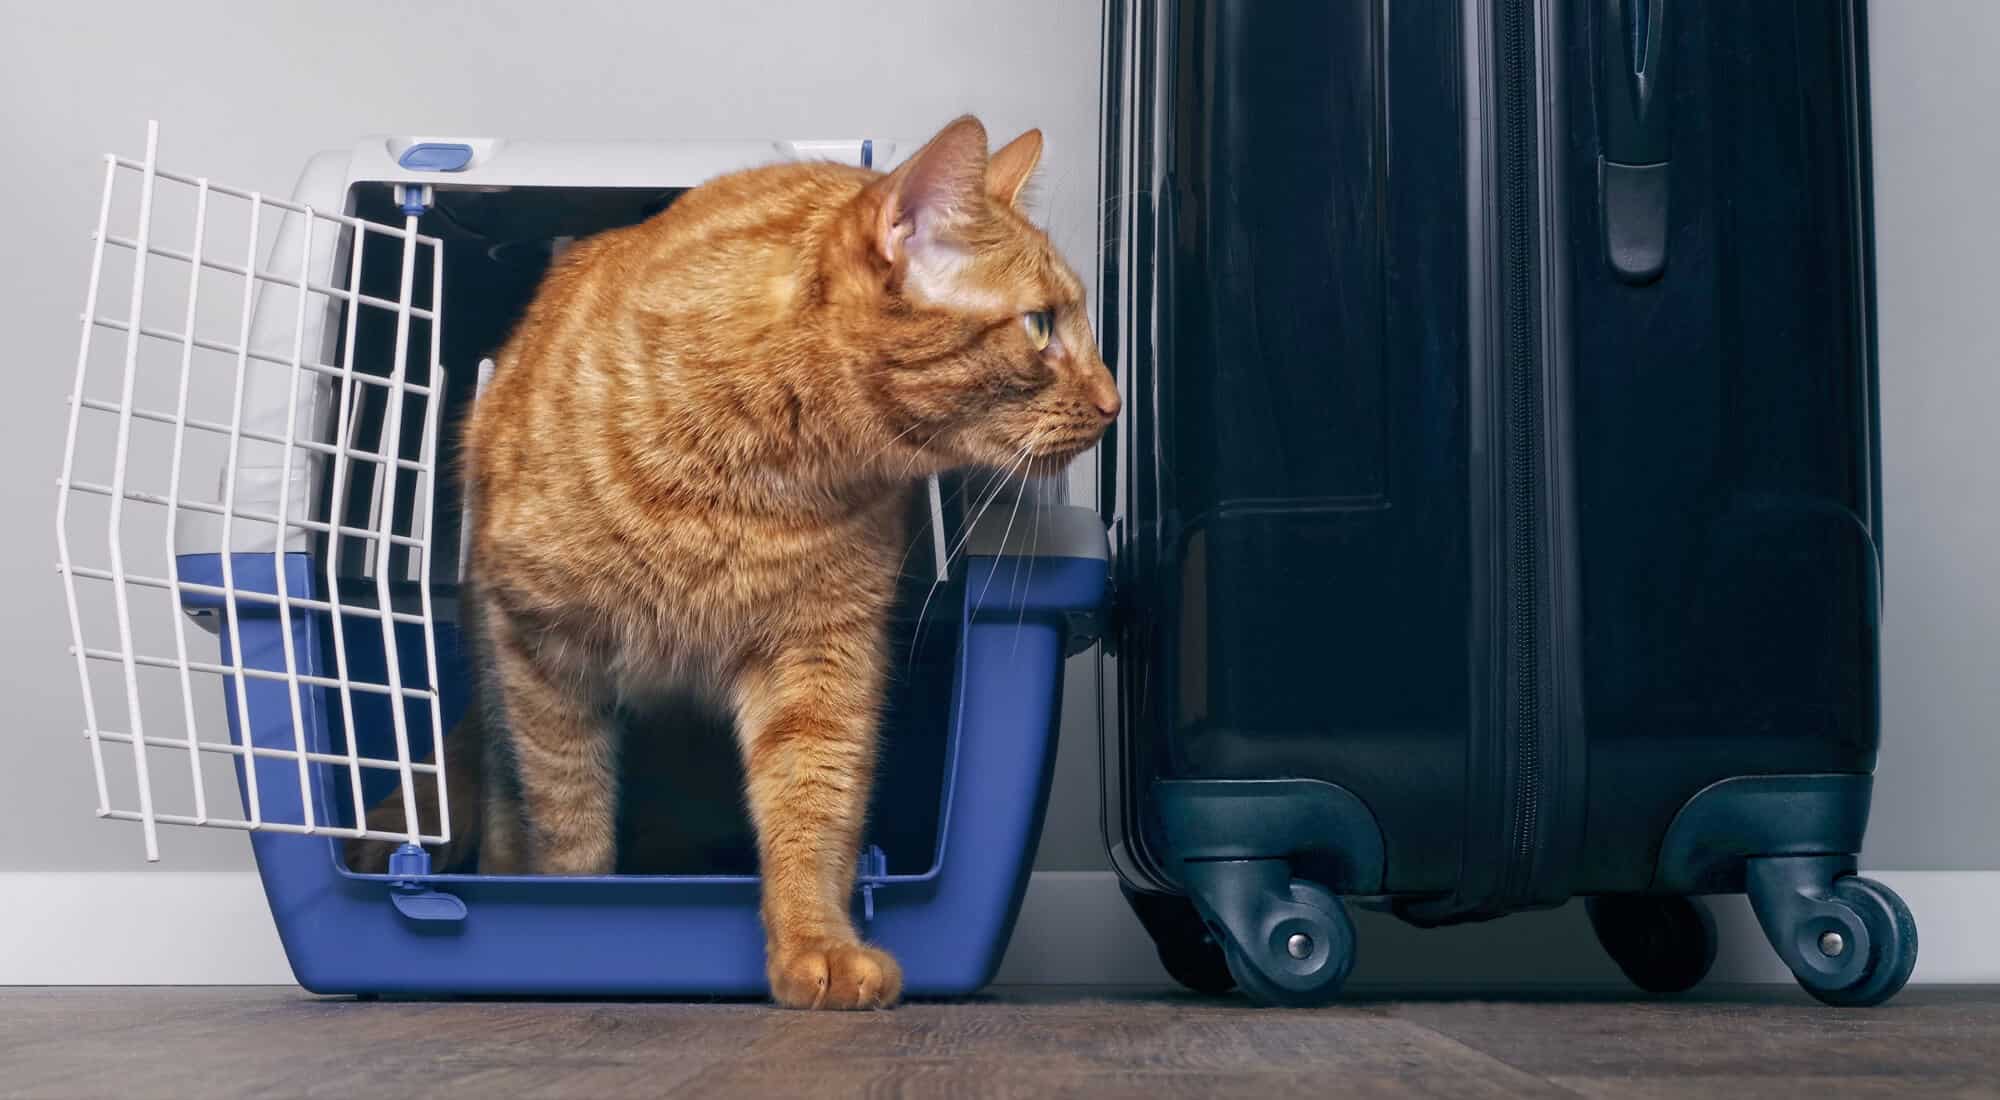 An orange cat going out of a carrier